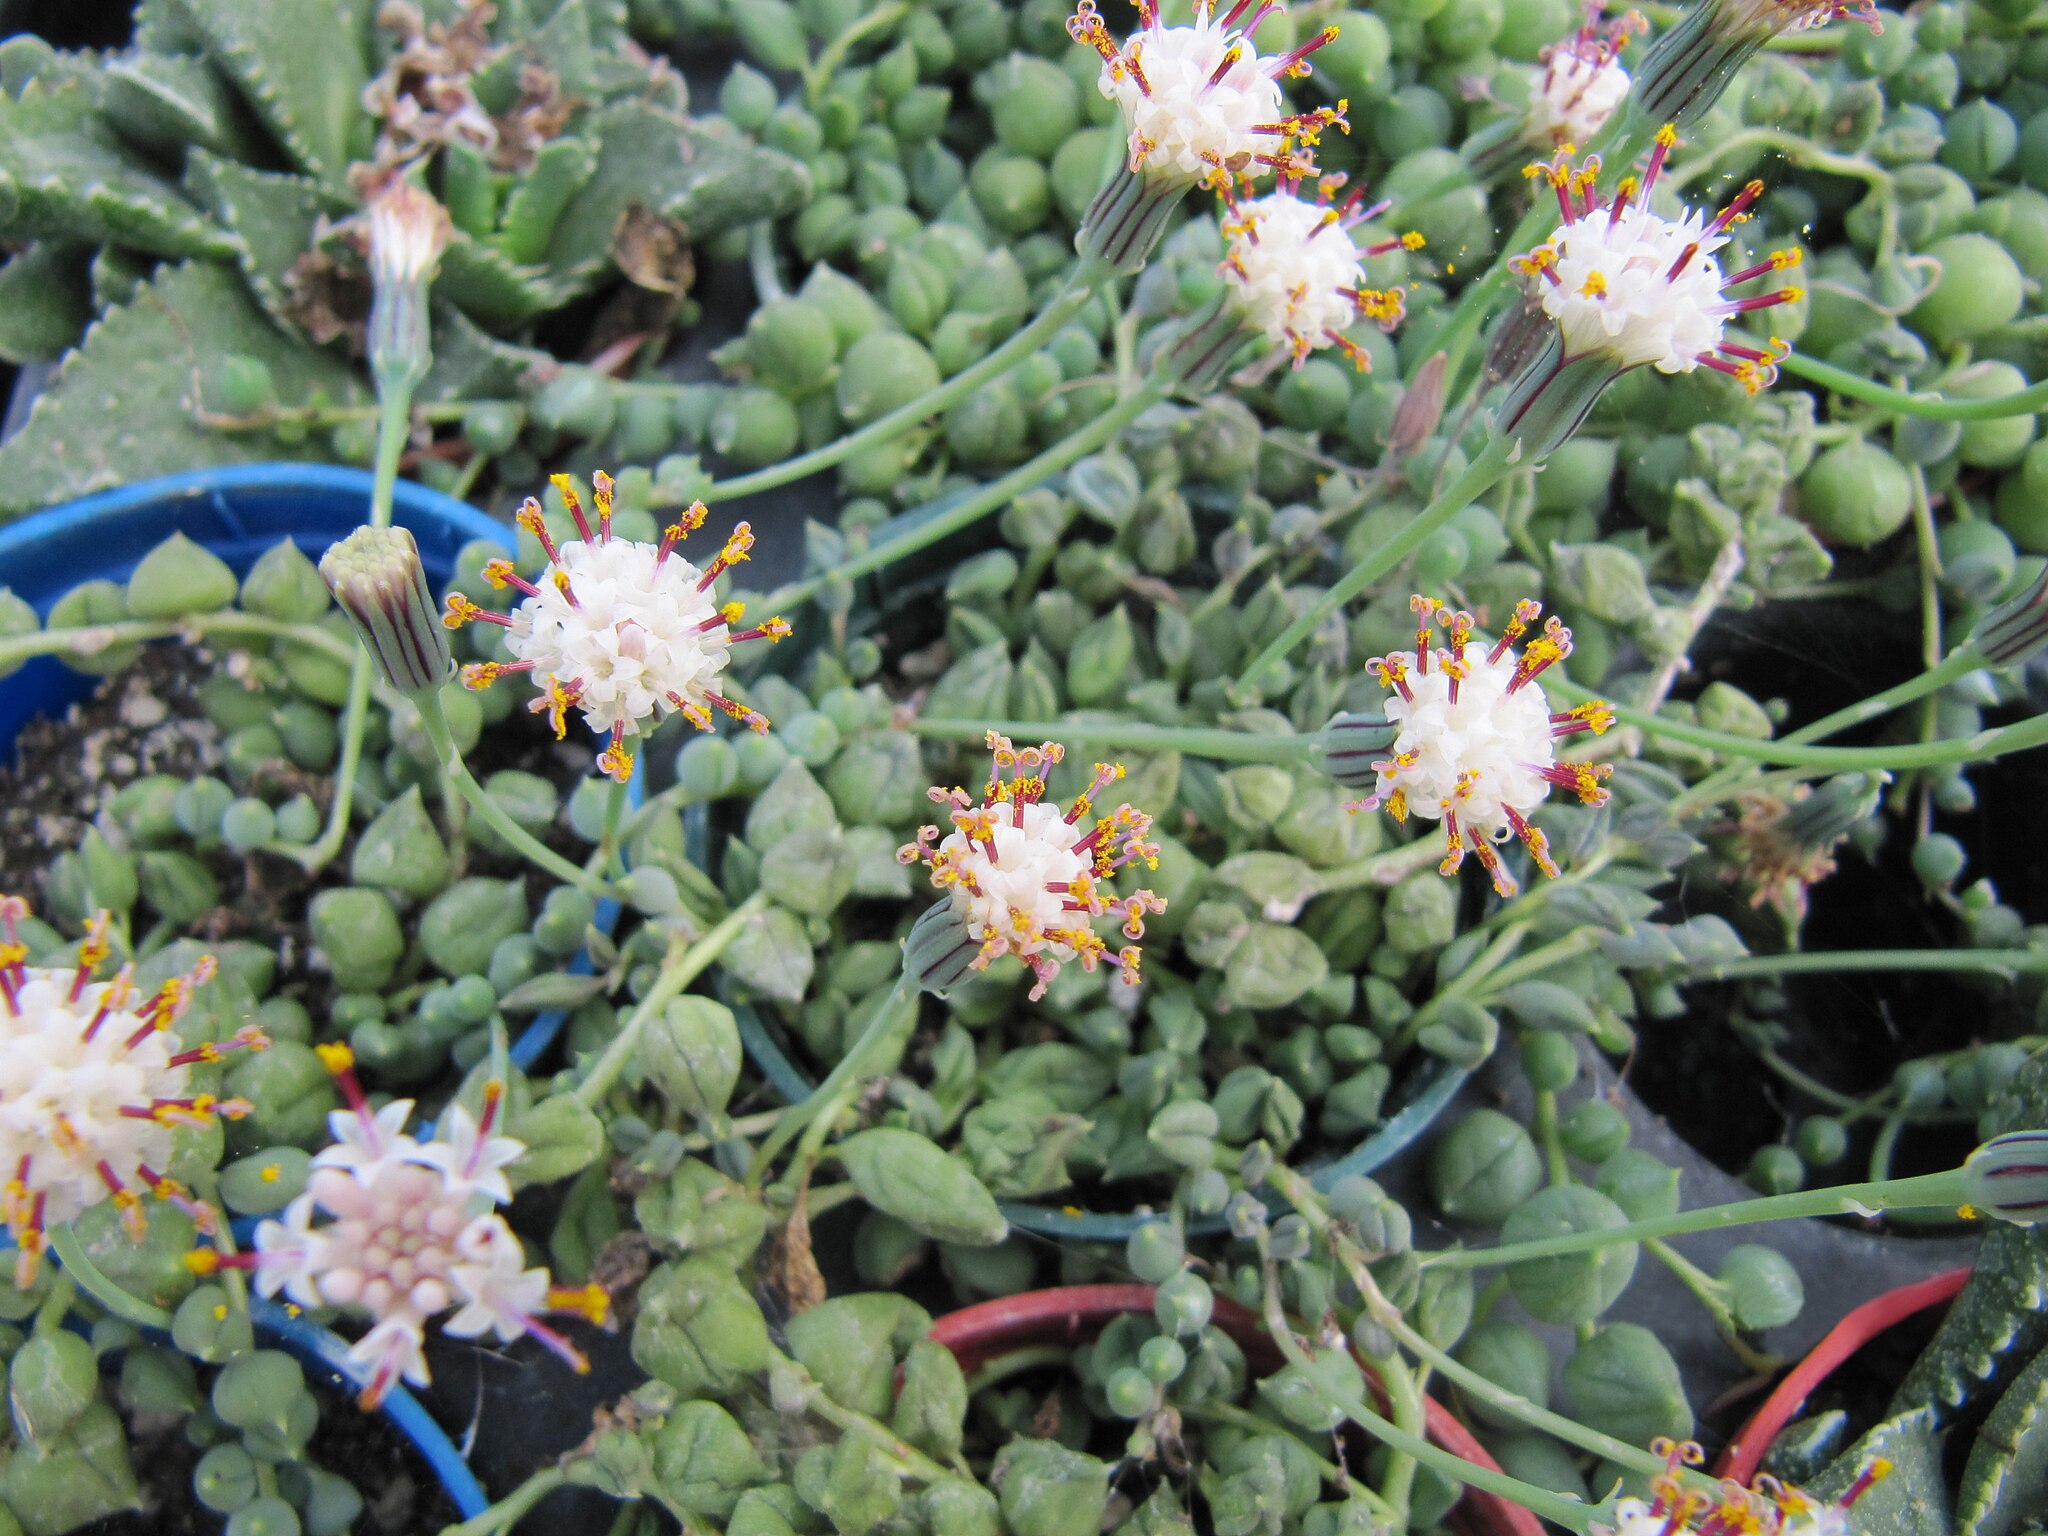 String-of-Pearls with white flowers